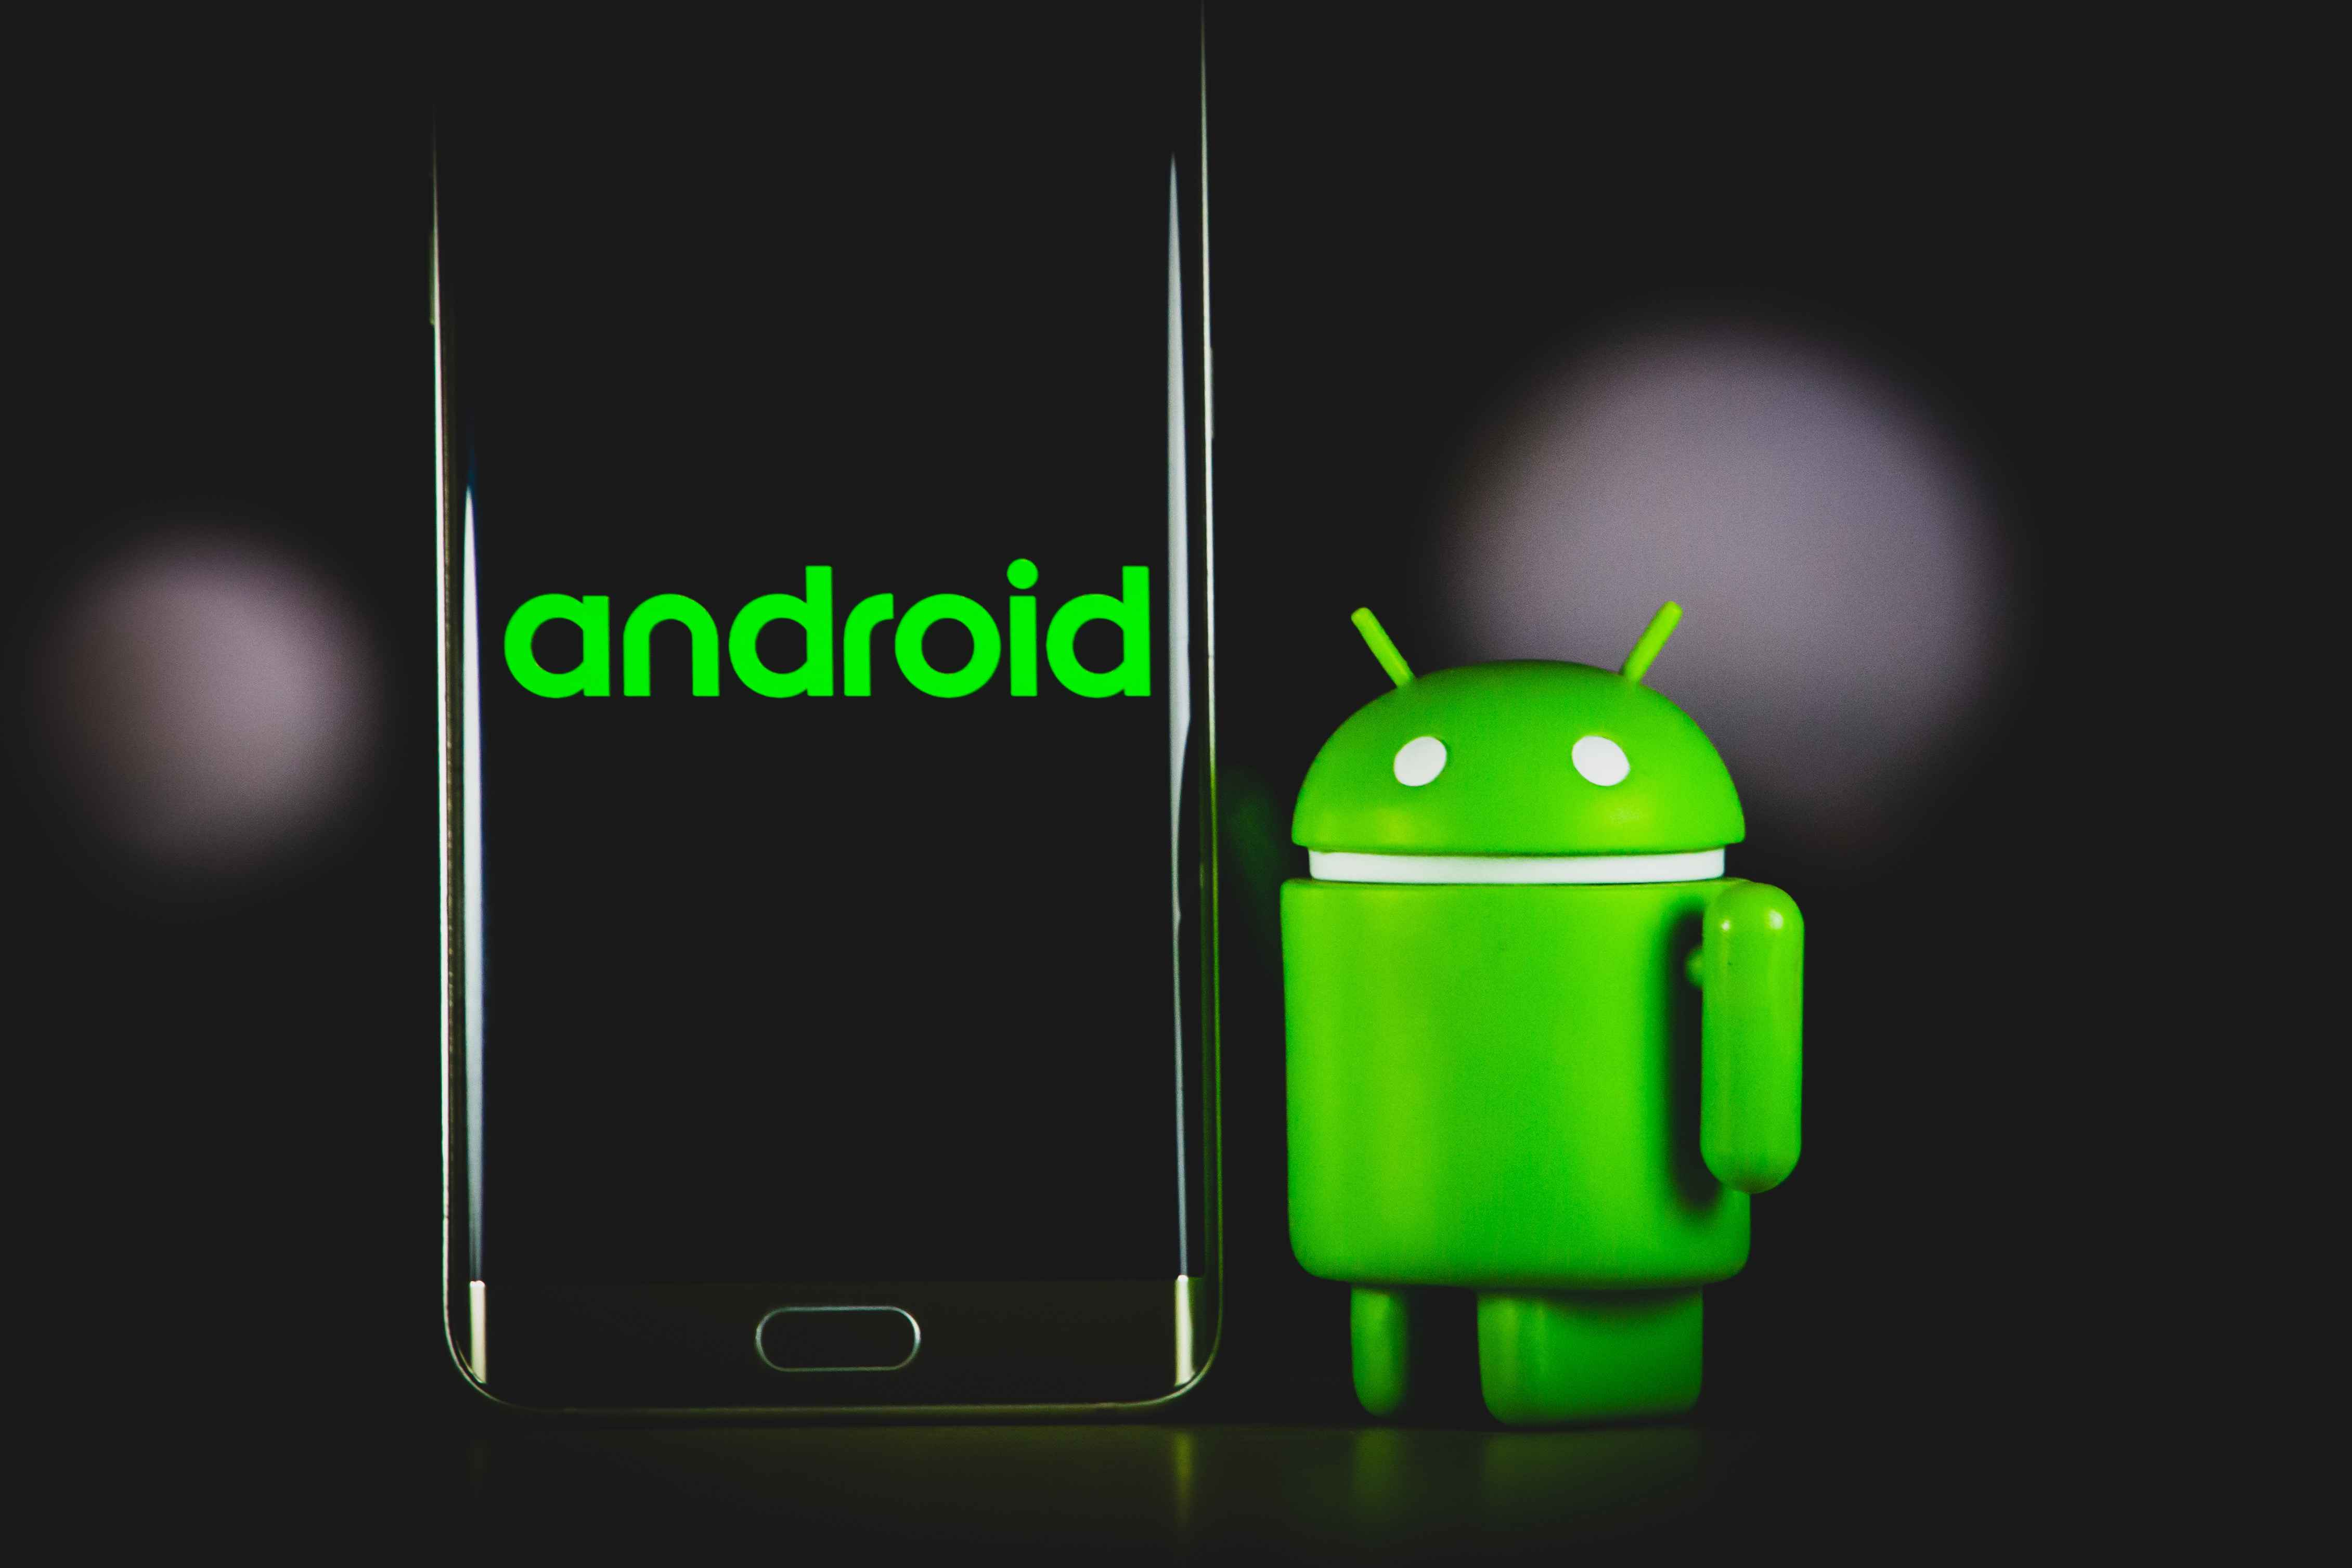 5 Simple Solutions to Fix the 'Unfortunately, Google Play Services Has Stopped' Error on Android Phones